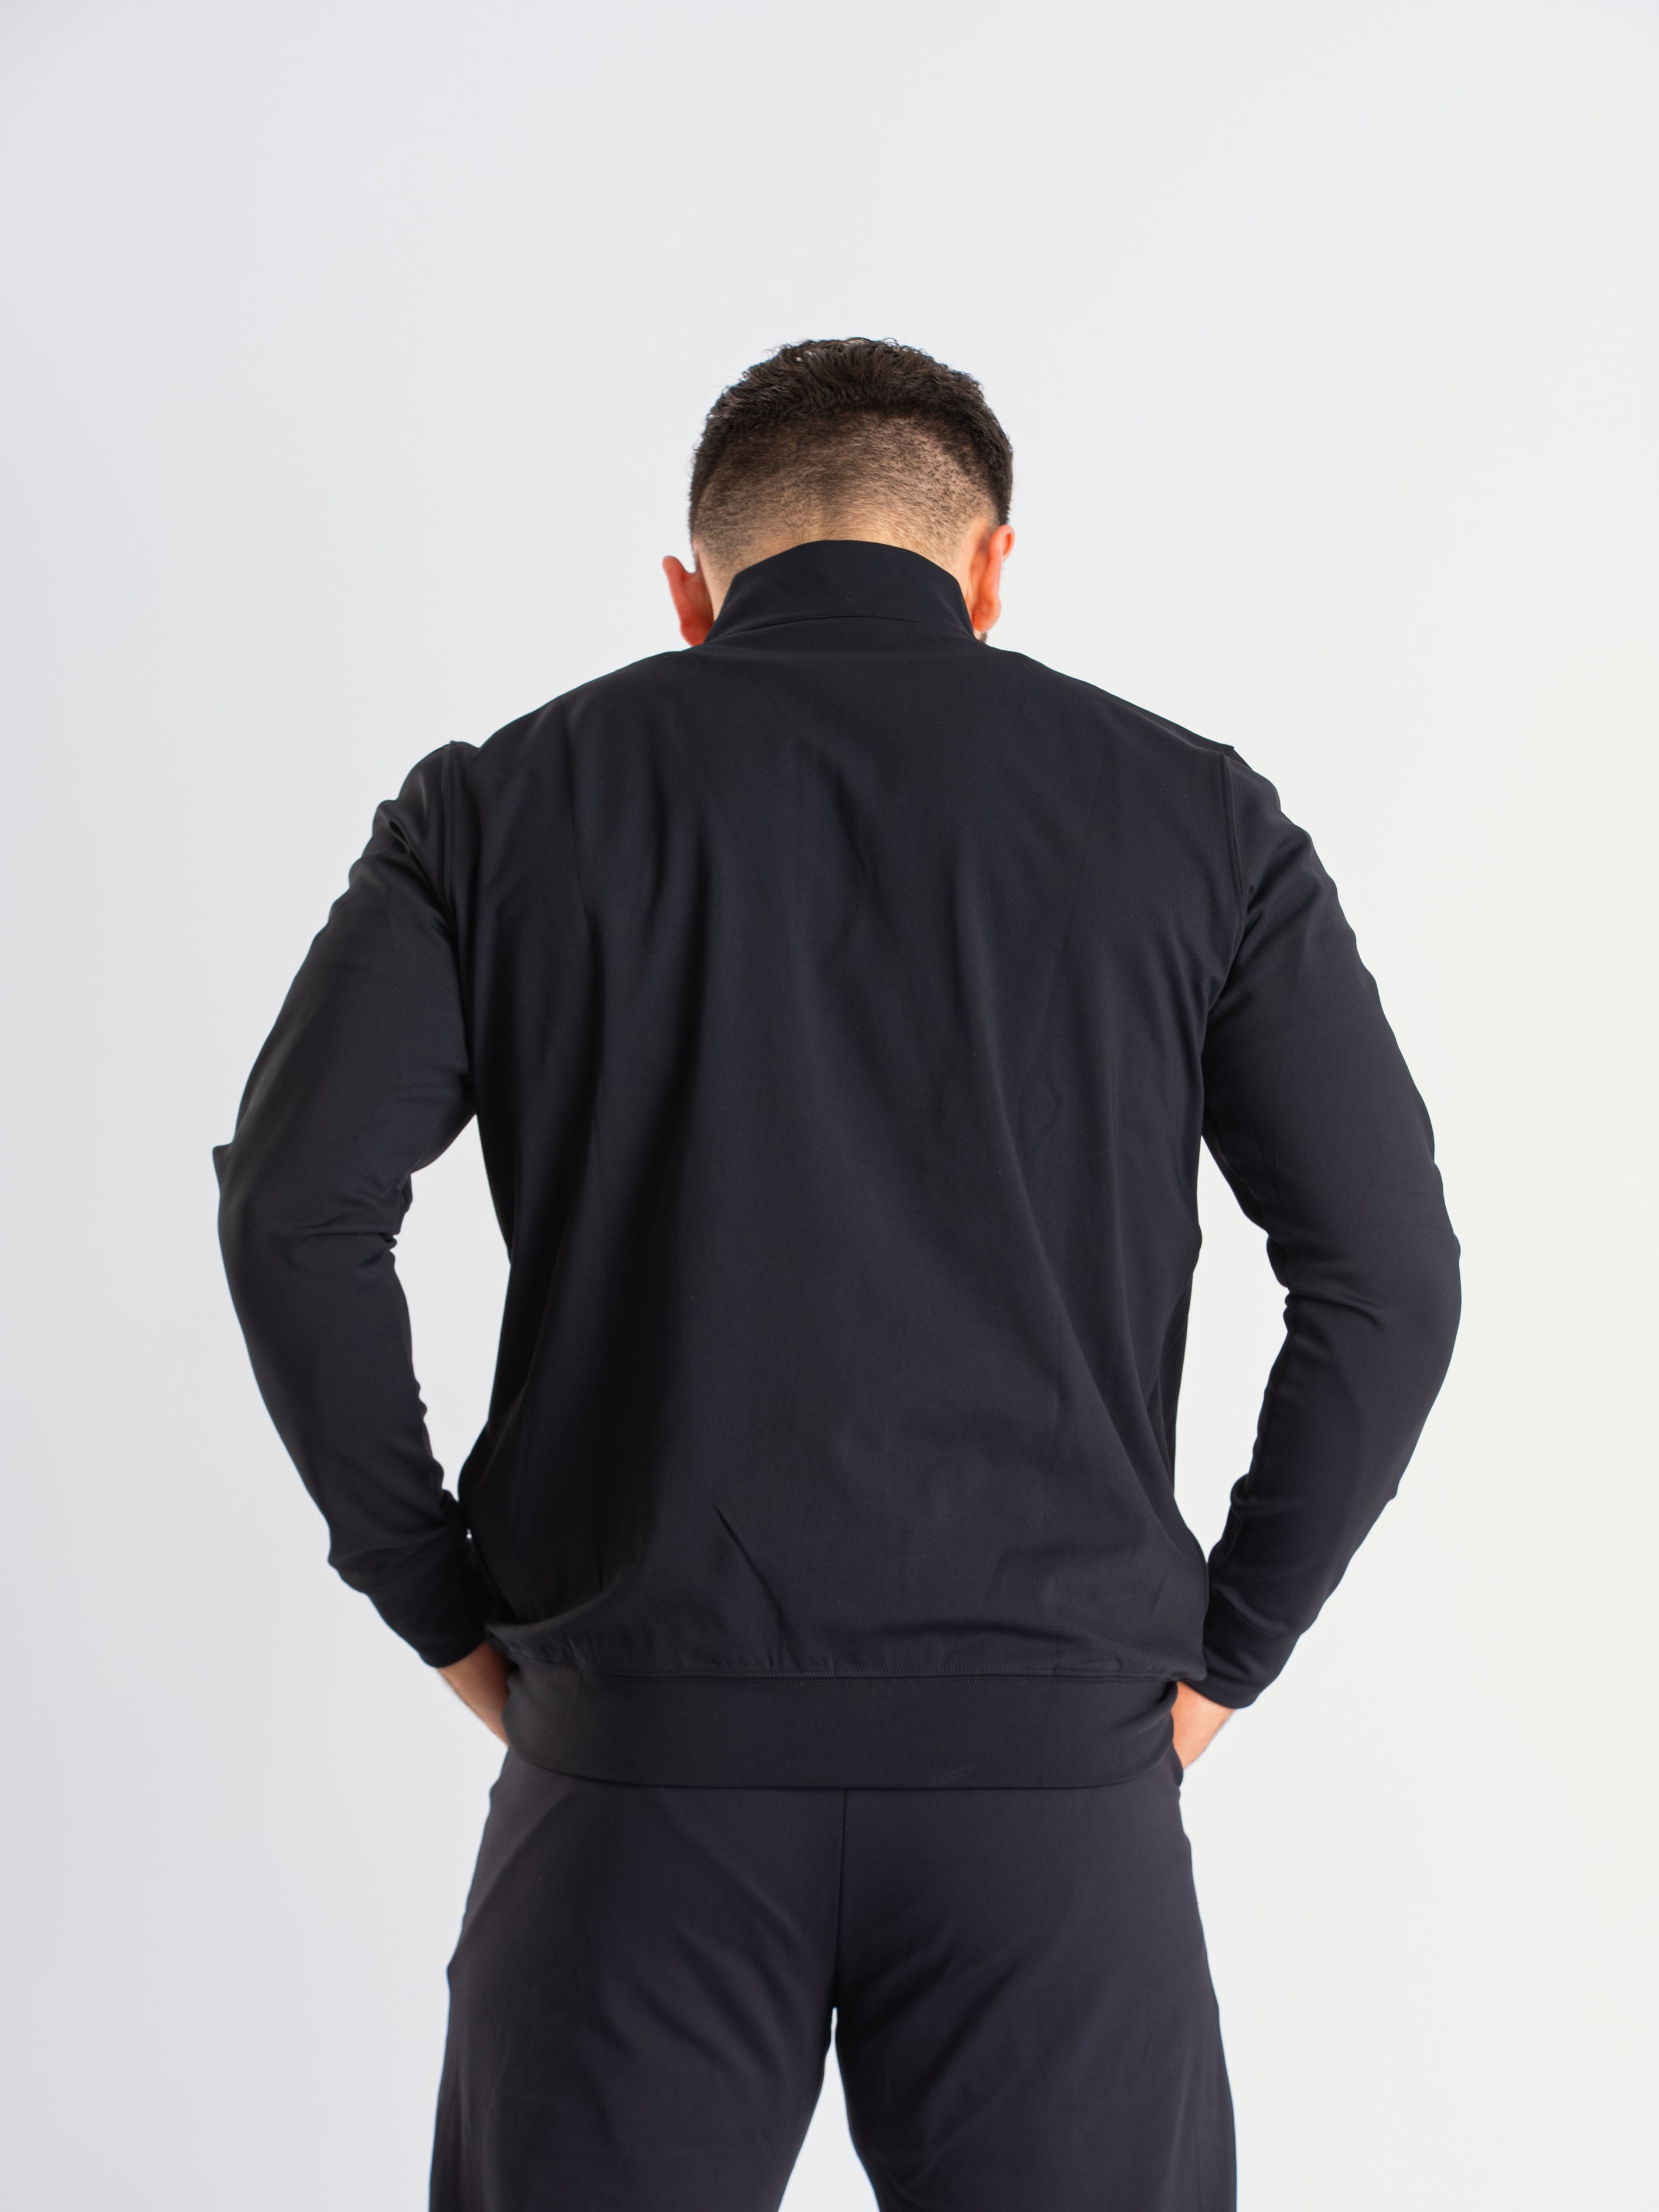 Cobra Quarter Zip Jacket offers unmatched comfort, and style for all strength athletes. The moisture-wicking fabric keeps you dry and comfortable in and out the gym. Featuring a quarter zip cut with durable YKK zippers, this jacket is built for both functionality and style. Designed with a unisex fit, it pairs perfectly with our matching Cobra 360Go 1Z Joggers and Shorts. All A7 Powerlifting Equipment shipping to UK, Norway, Switzerland and Iceland.